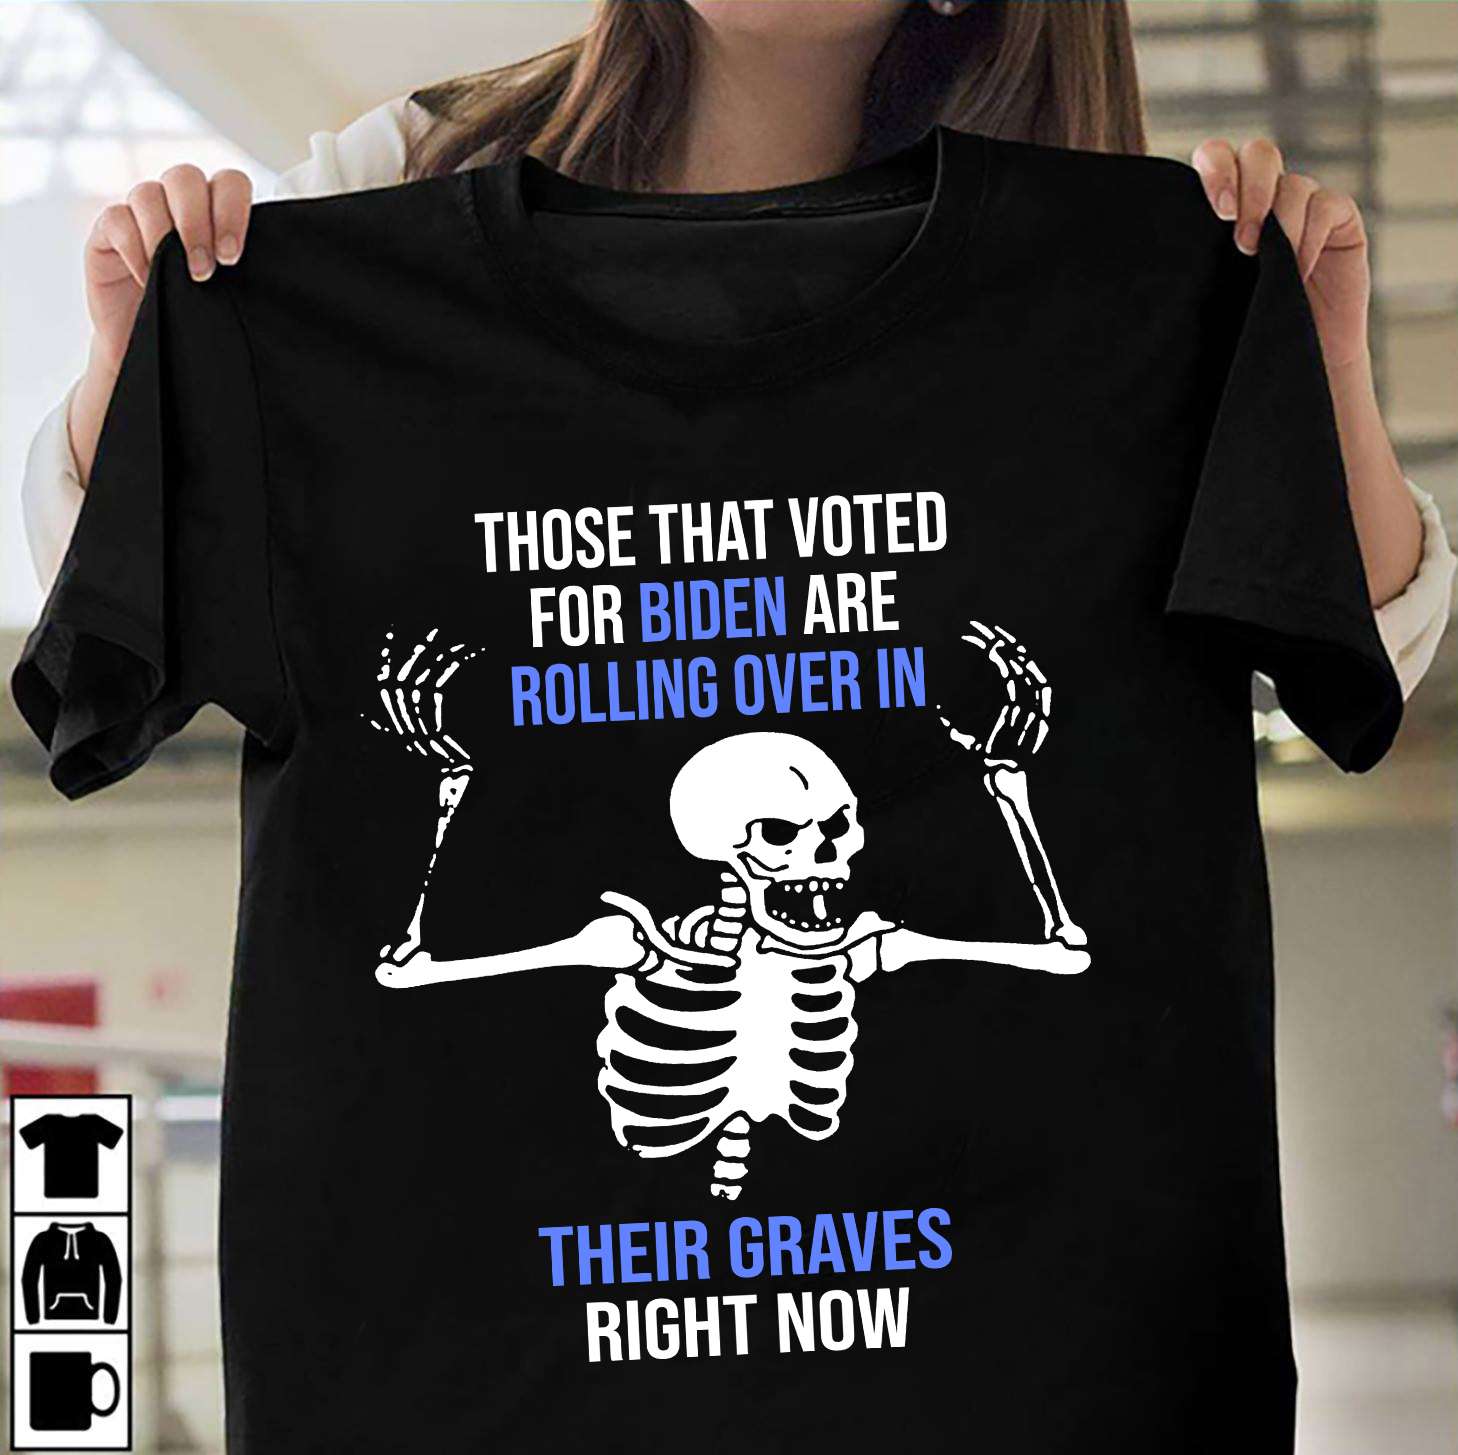 Those that voted for Biden are rolling over in their graves right now - Angry skull, Joe Biden America president